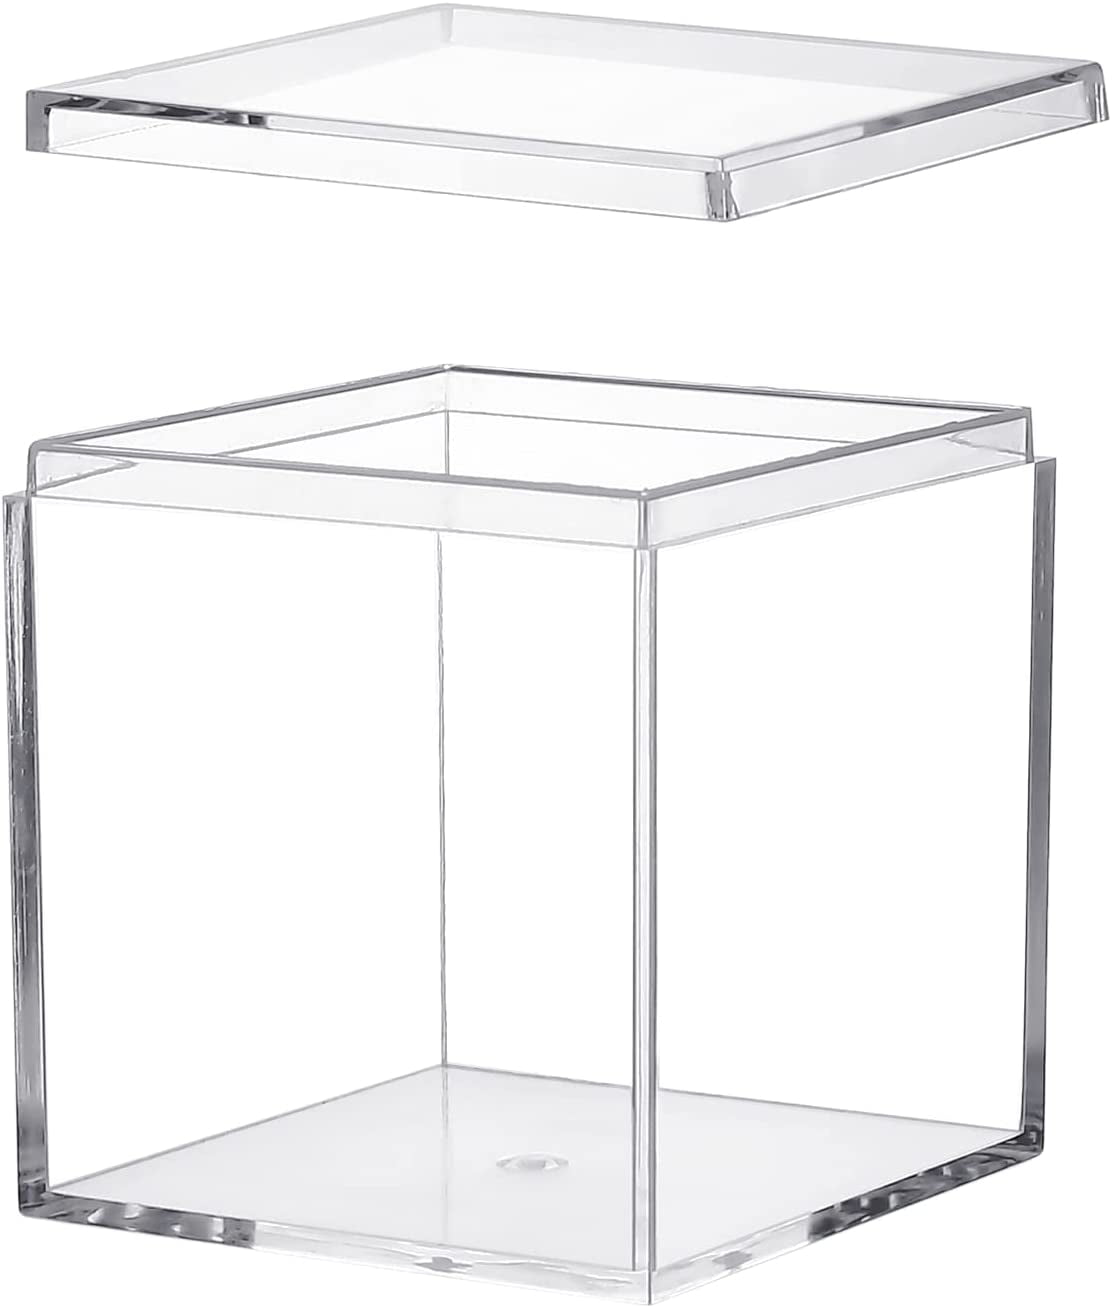 Small Acrylic Box with Lid Clear Acrylic Square Cube Small Acrylic Display